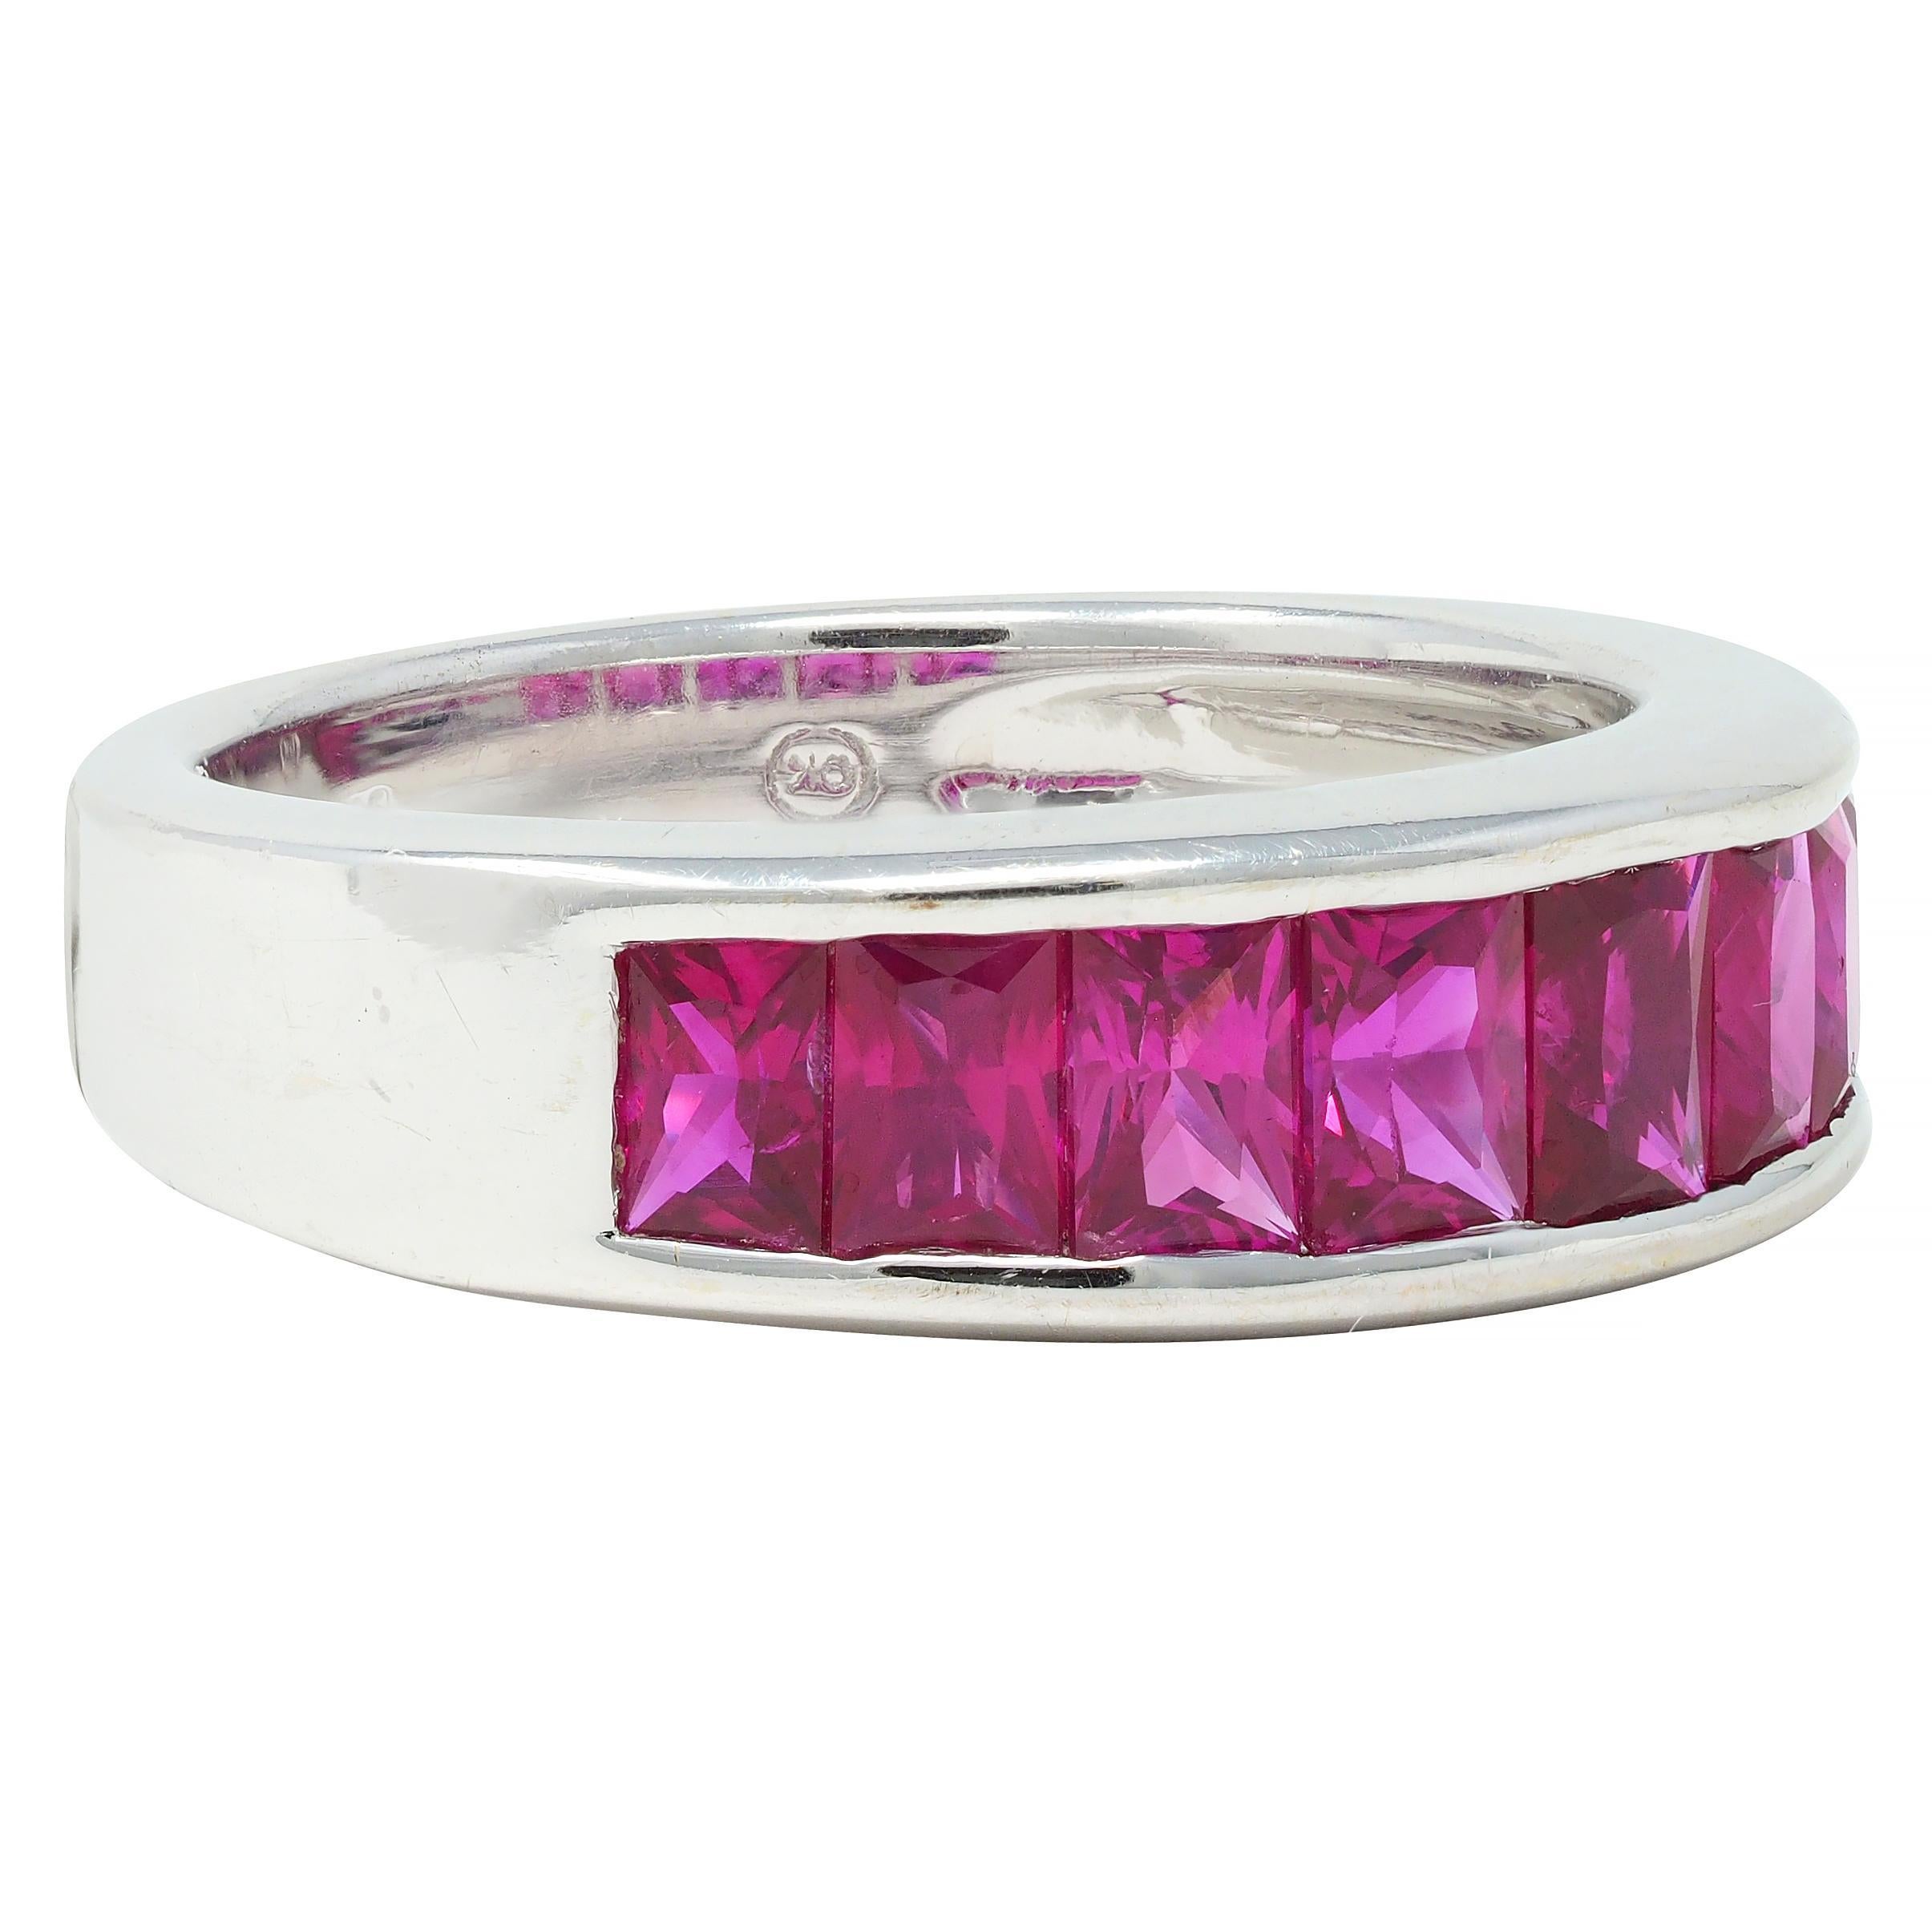 Band ring is channel set to front by eight scissor-cut rubies - graduating in size
Weighing in total approximately 2.00 carats
Eye clean with very well-matched purplish-red color
Maker's marks and stamped 750 for 18 karat gold
Circa: 1990s
Ring